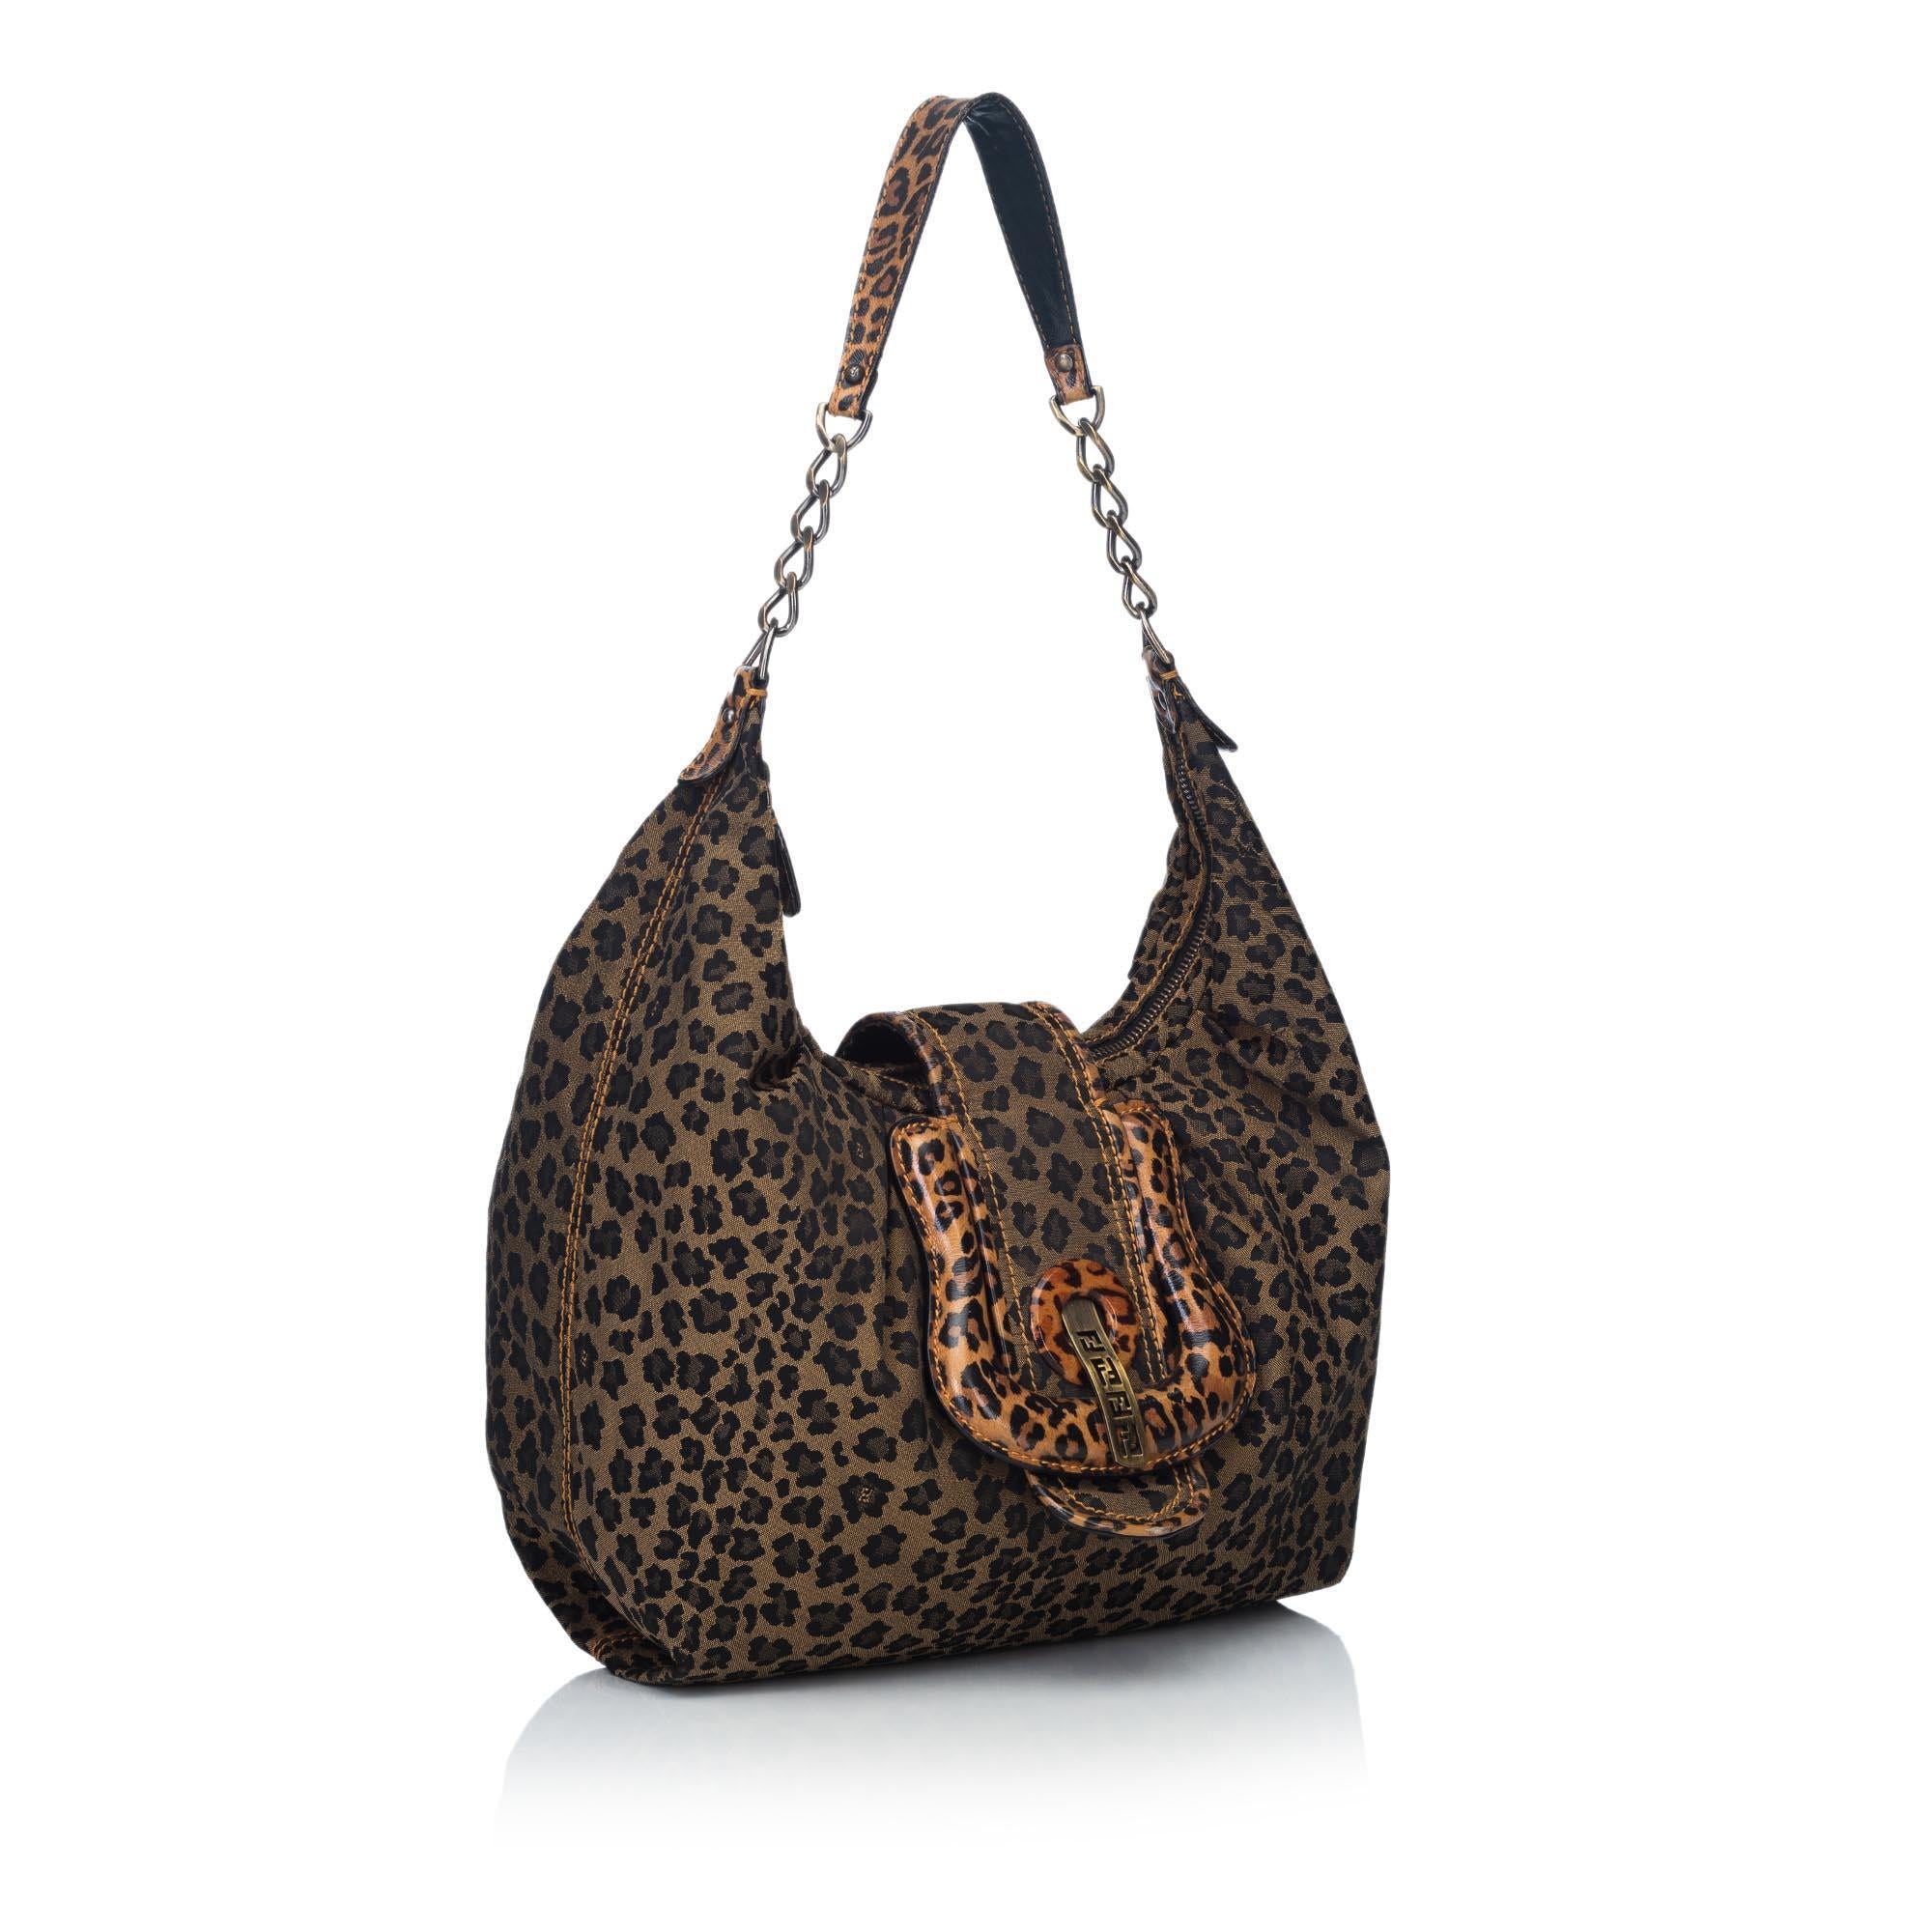 The Fendi B. Bag Hobo features a canvas body with all over leopard print, flat leather and chain strap, top zip closure, front buckle with magnetic snap closure, and interior slip pockets. 

Strap drop: 33 cm. 